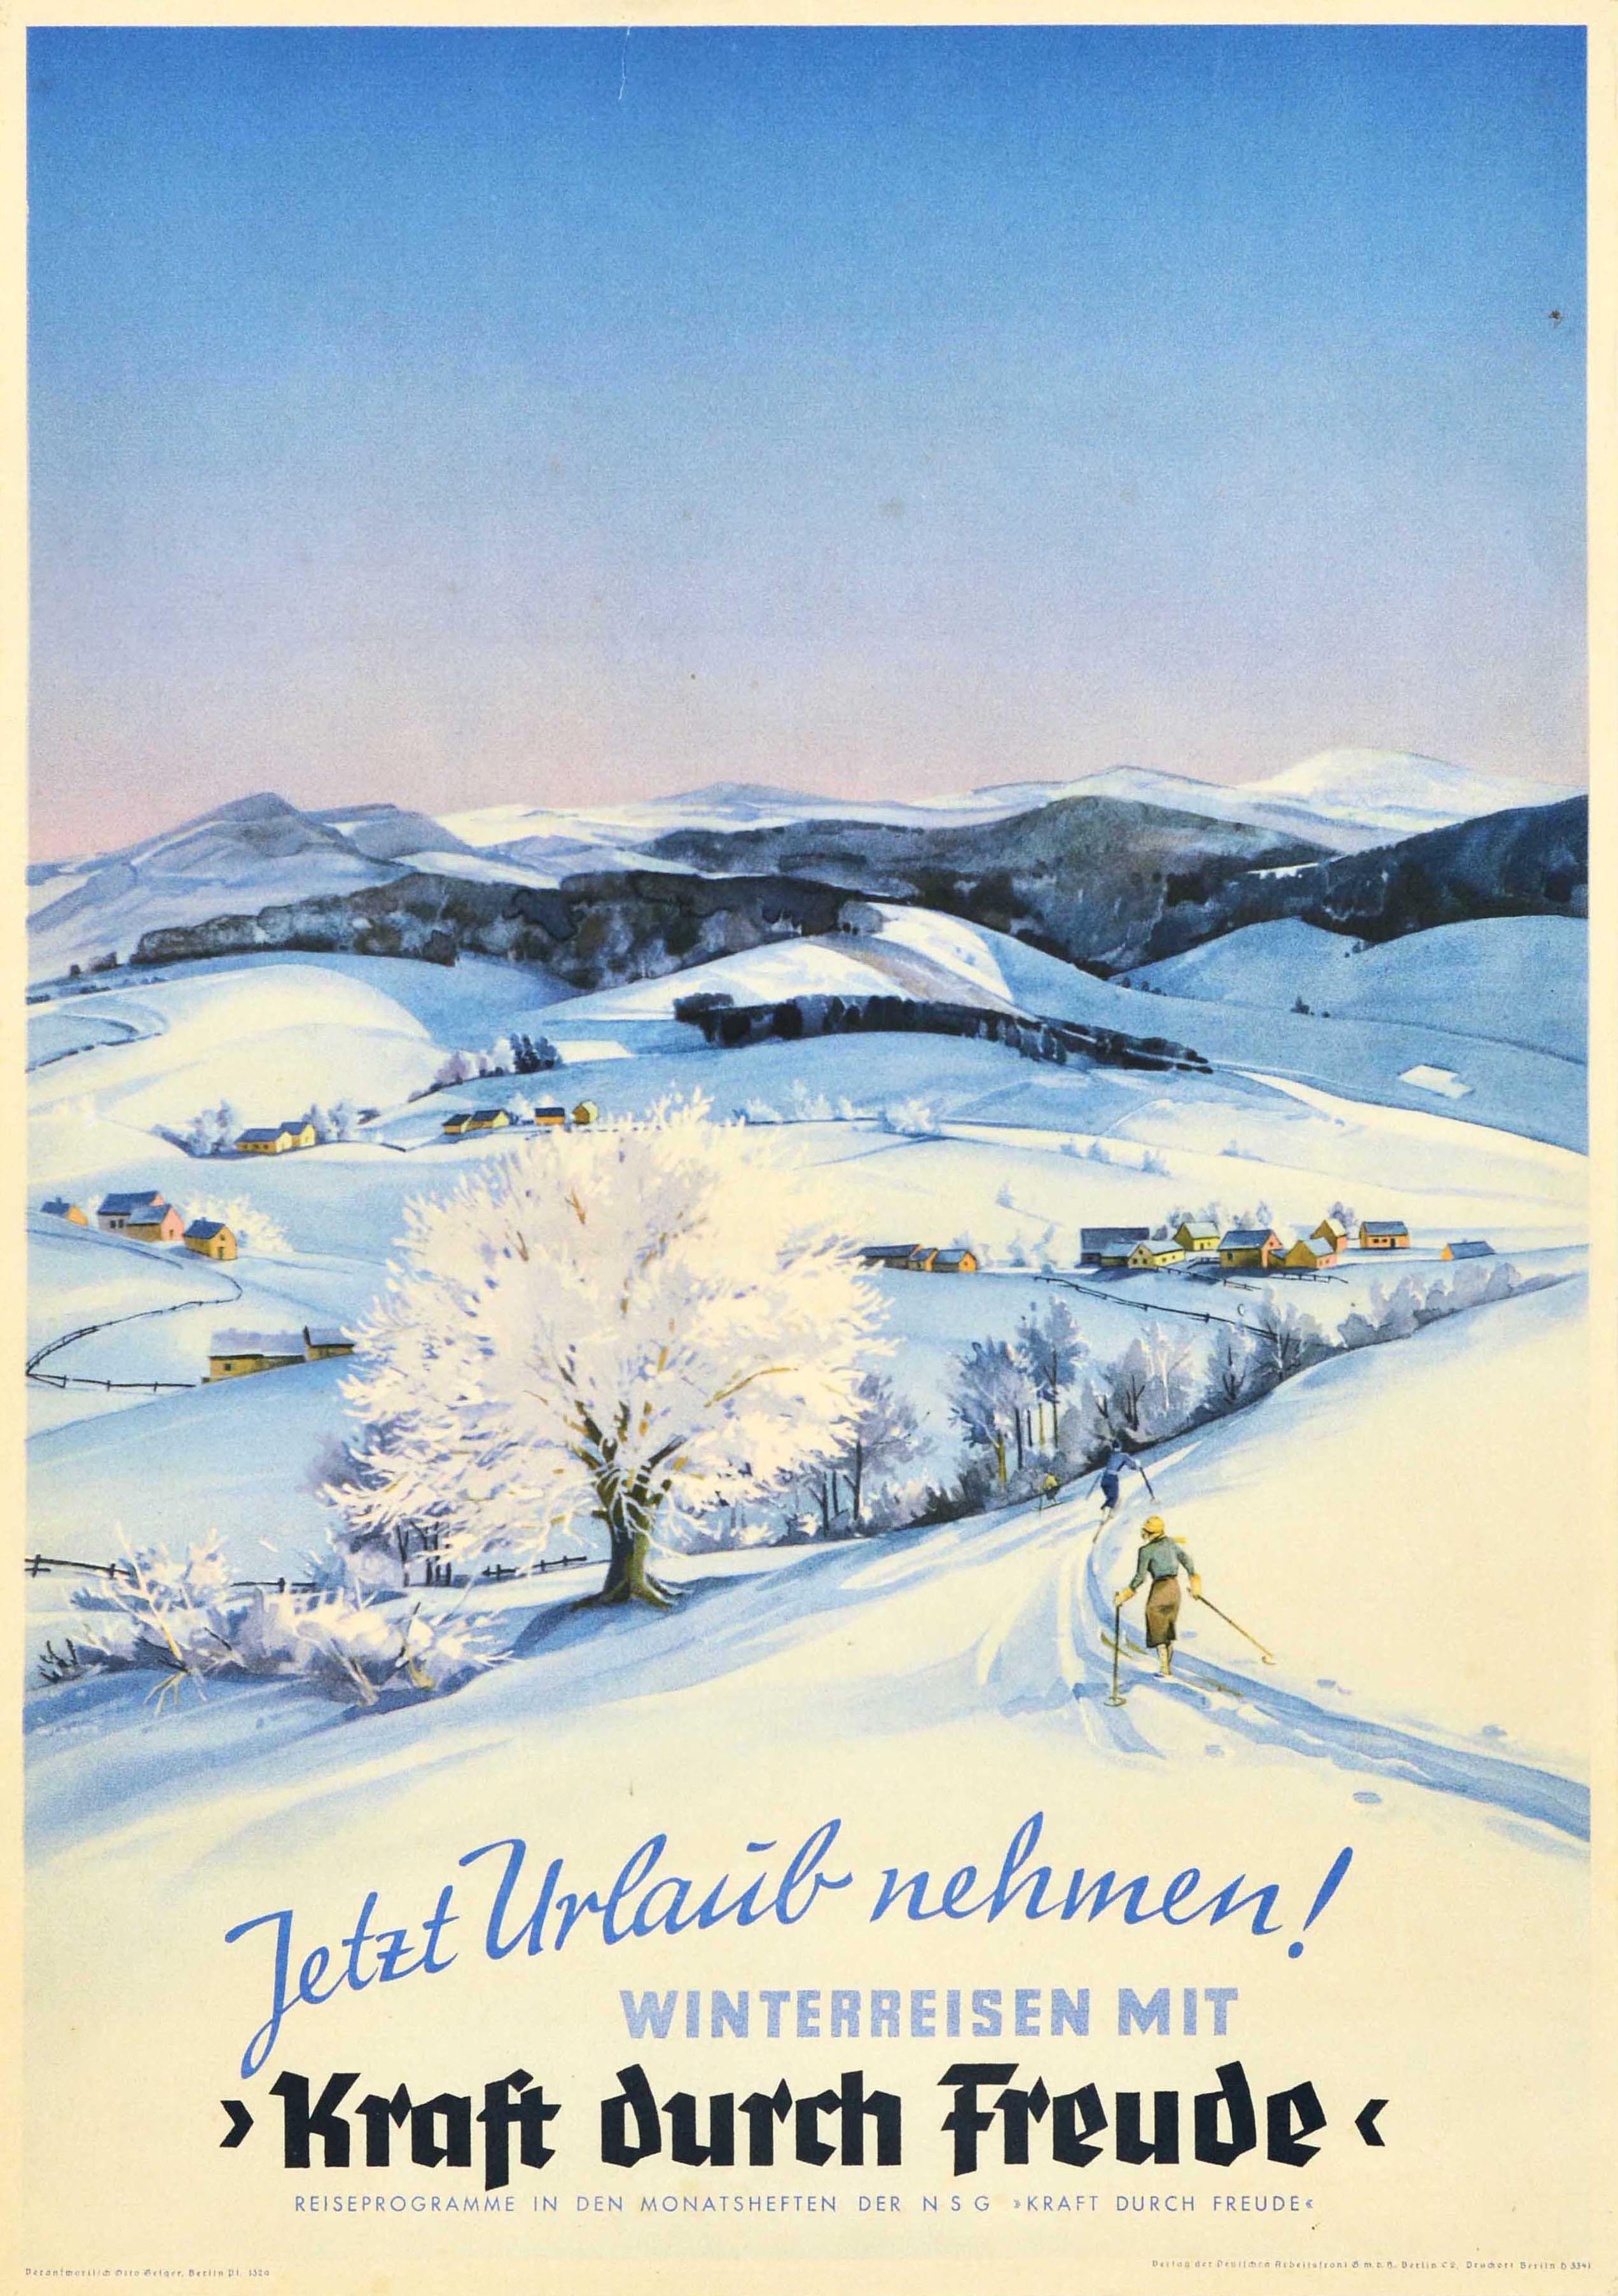 Unknown Print - Original Vintage Travel Poster Winter Holiday Now Kraft Durch Freude Skiing